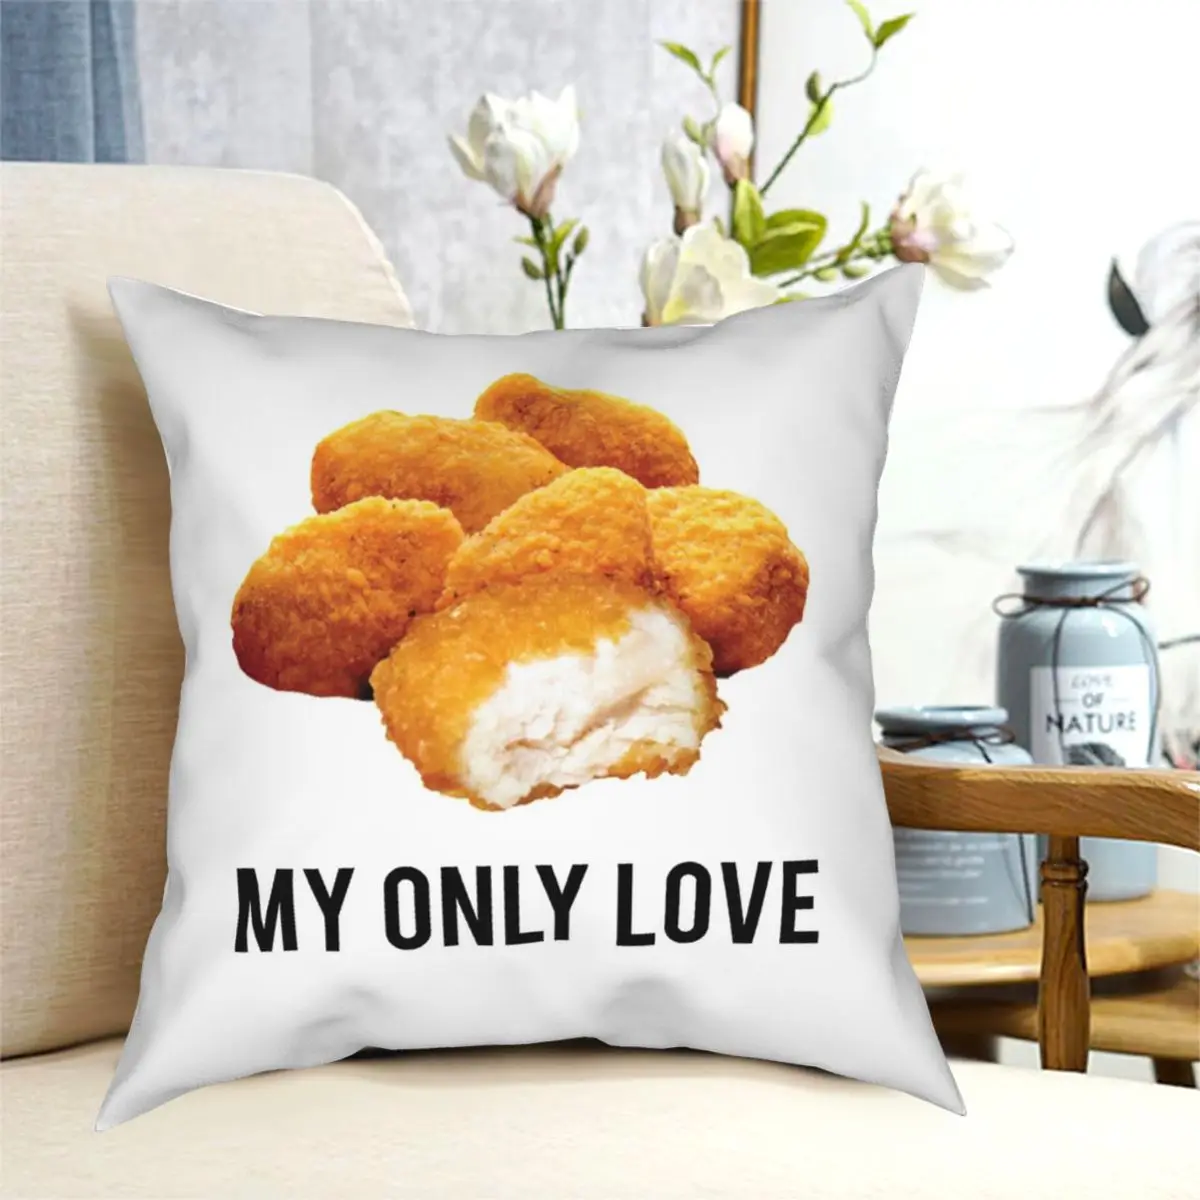 

Chicken Nuggets My Only Love Square Pillowcase Polyester Pattern Zipper Decor for Bed Cushion Cover